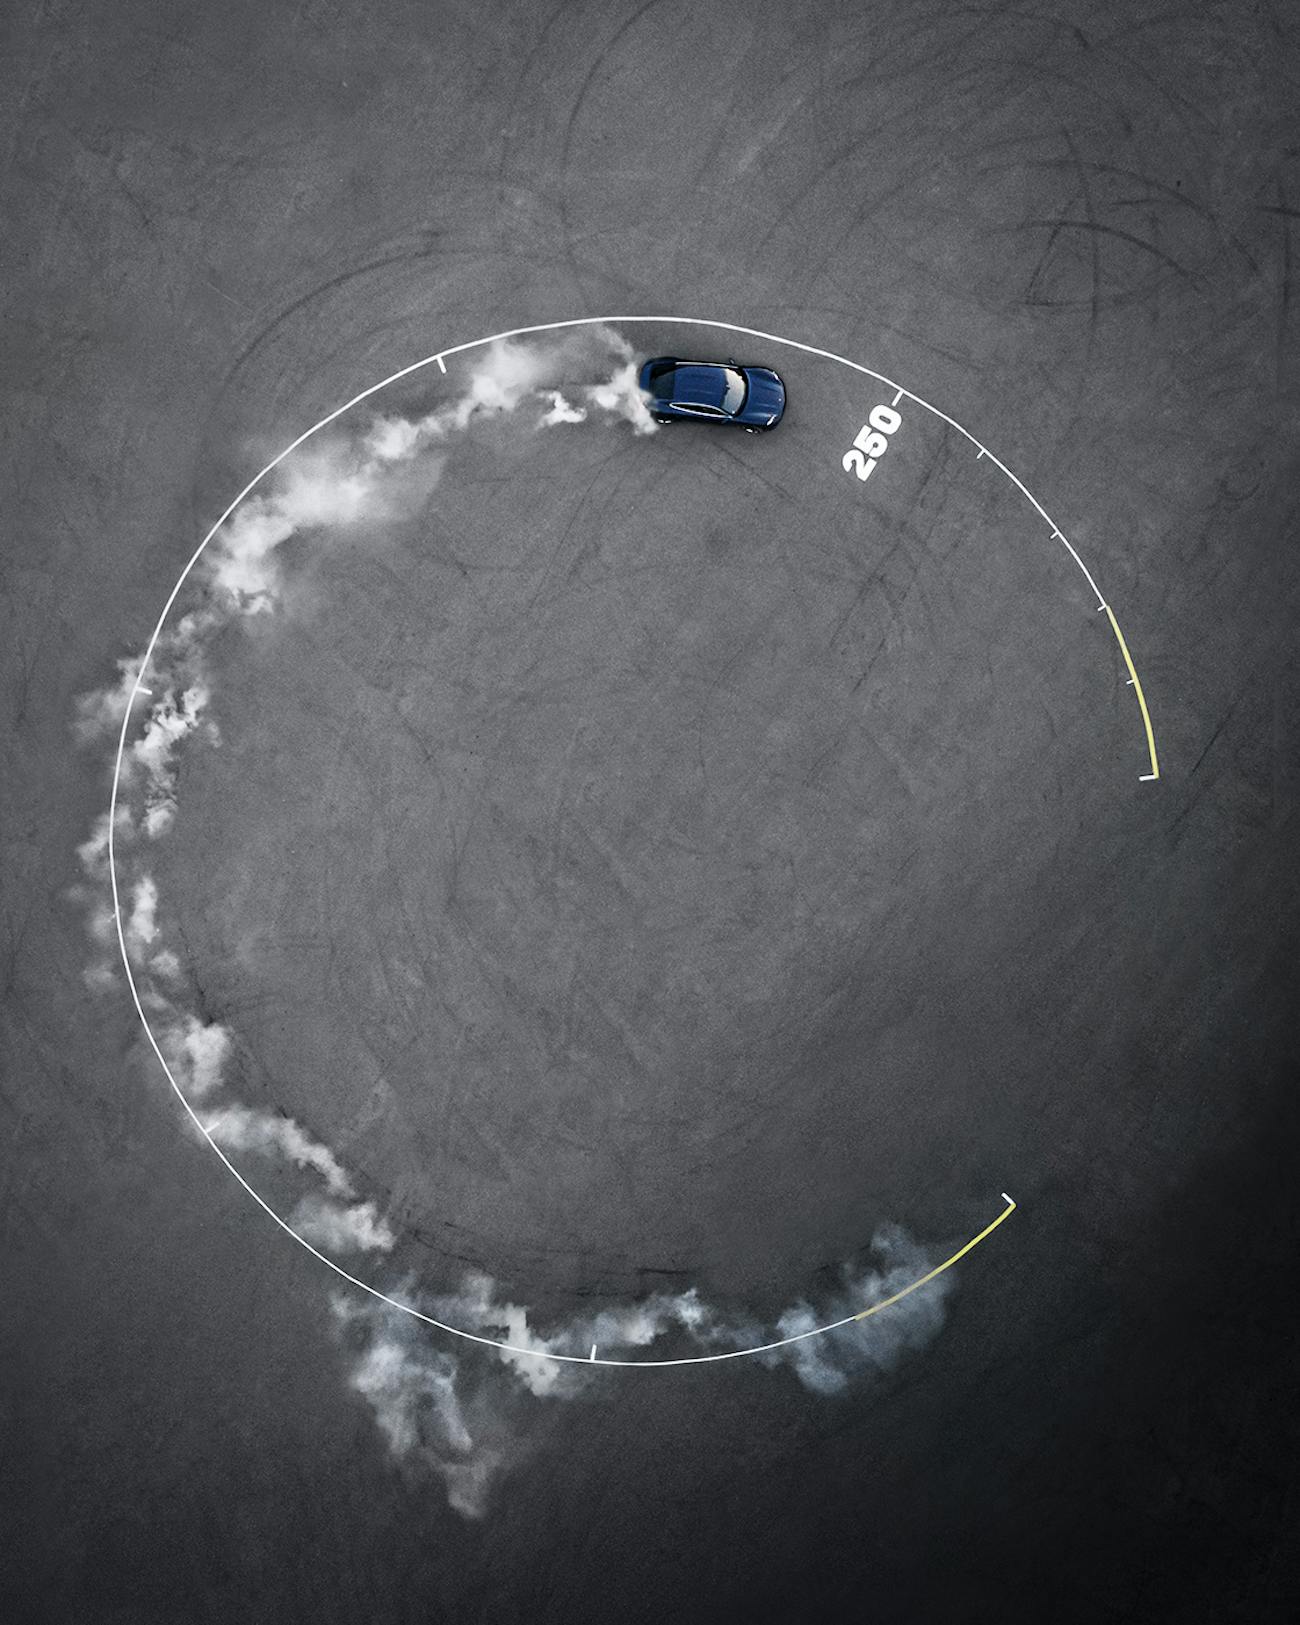 Porsche Taycan drives in circle with smoke billowing from rear